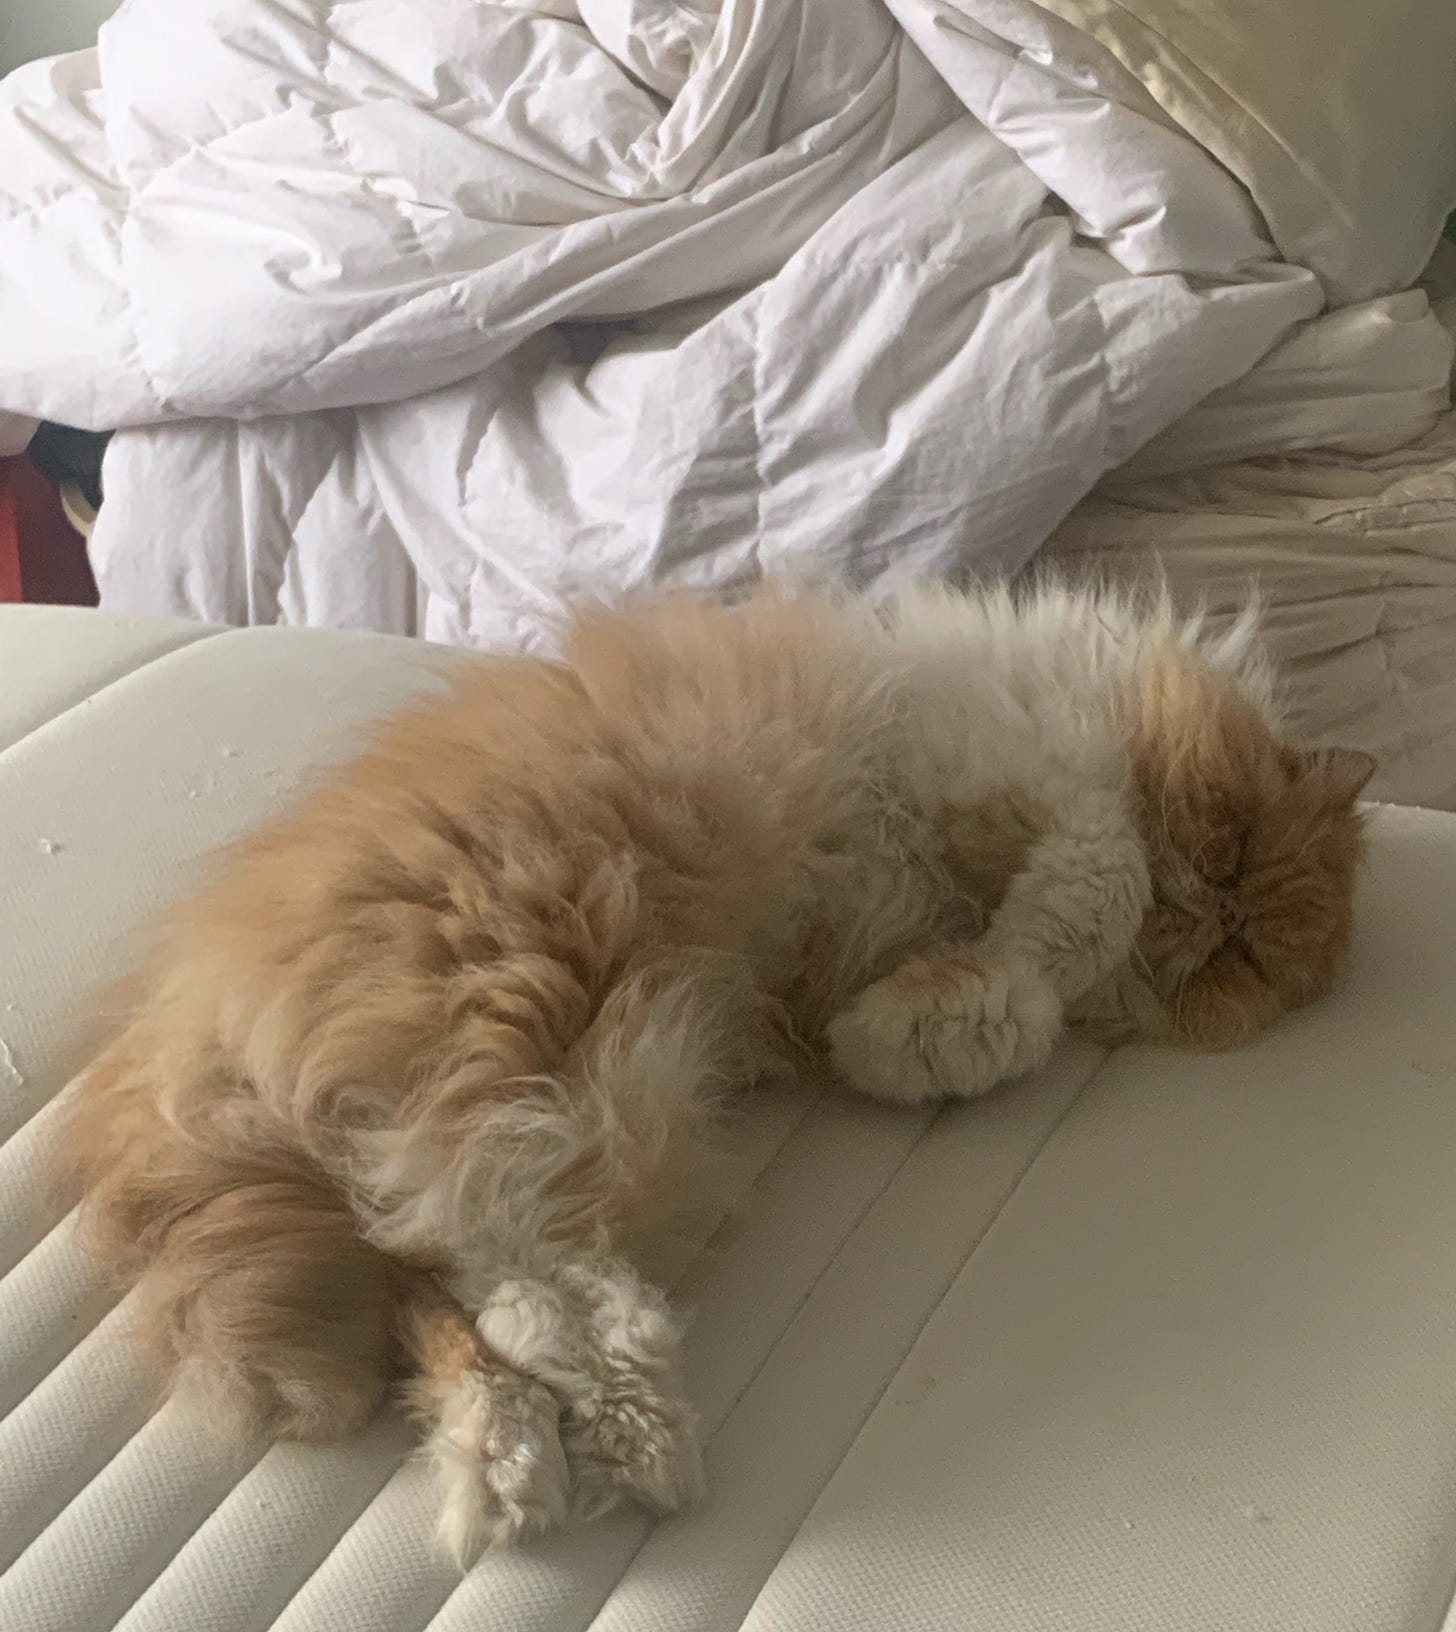 A fluffy cat is curled up on a mattress.